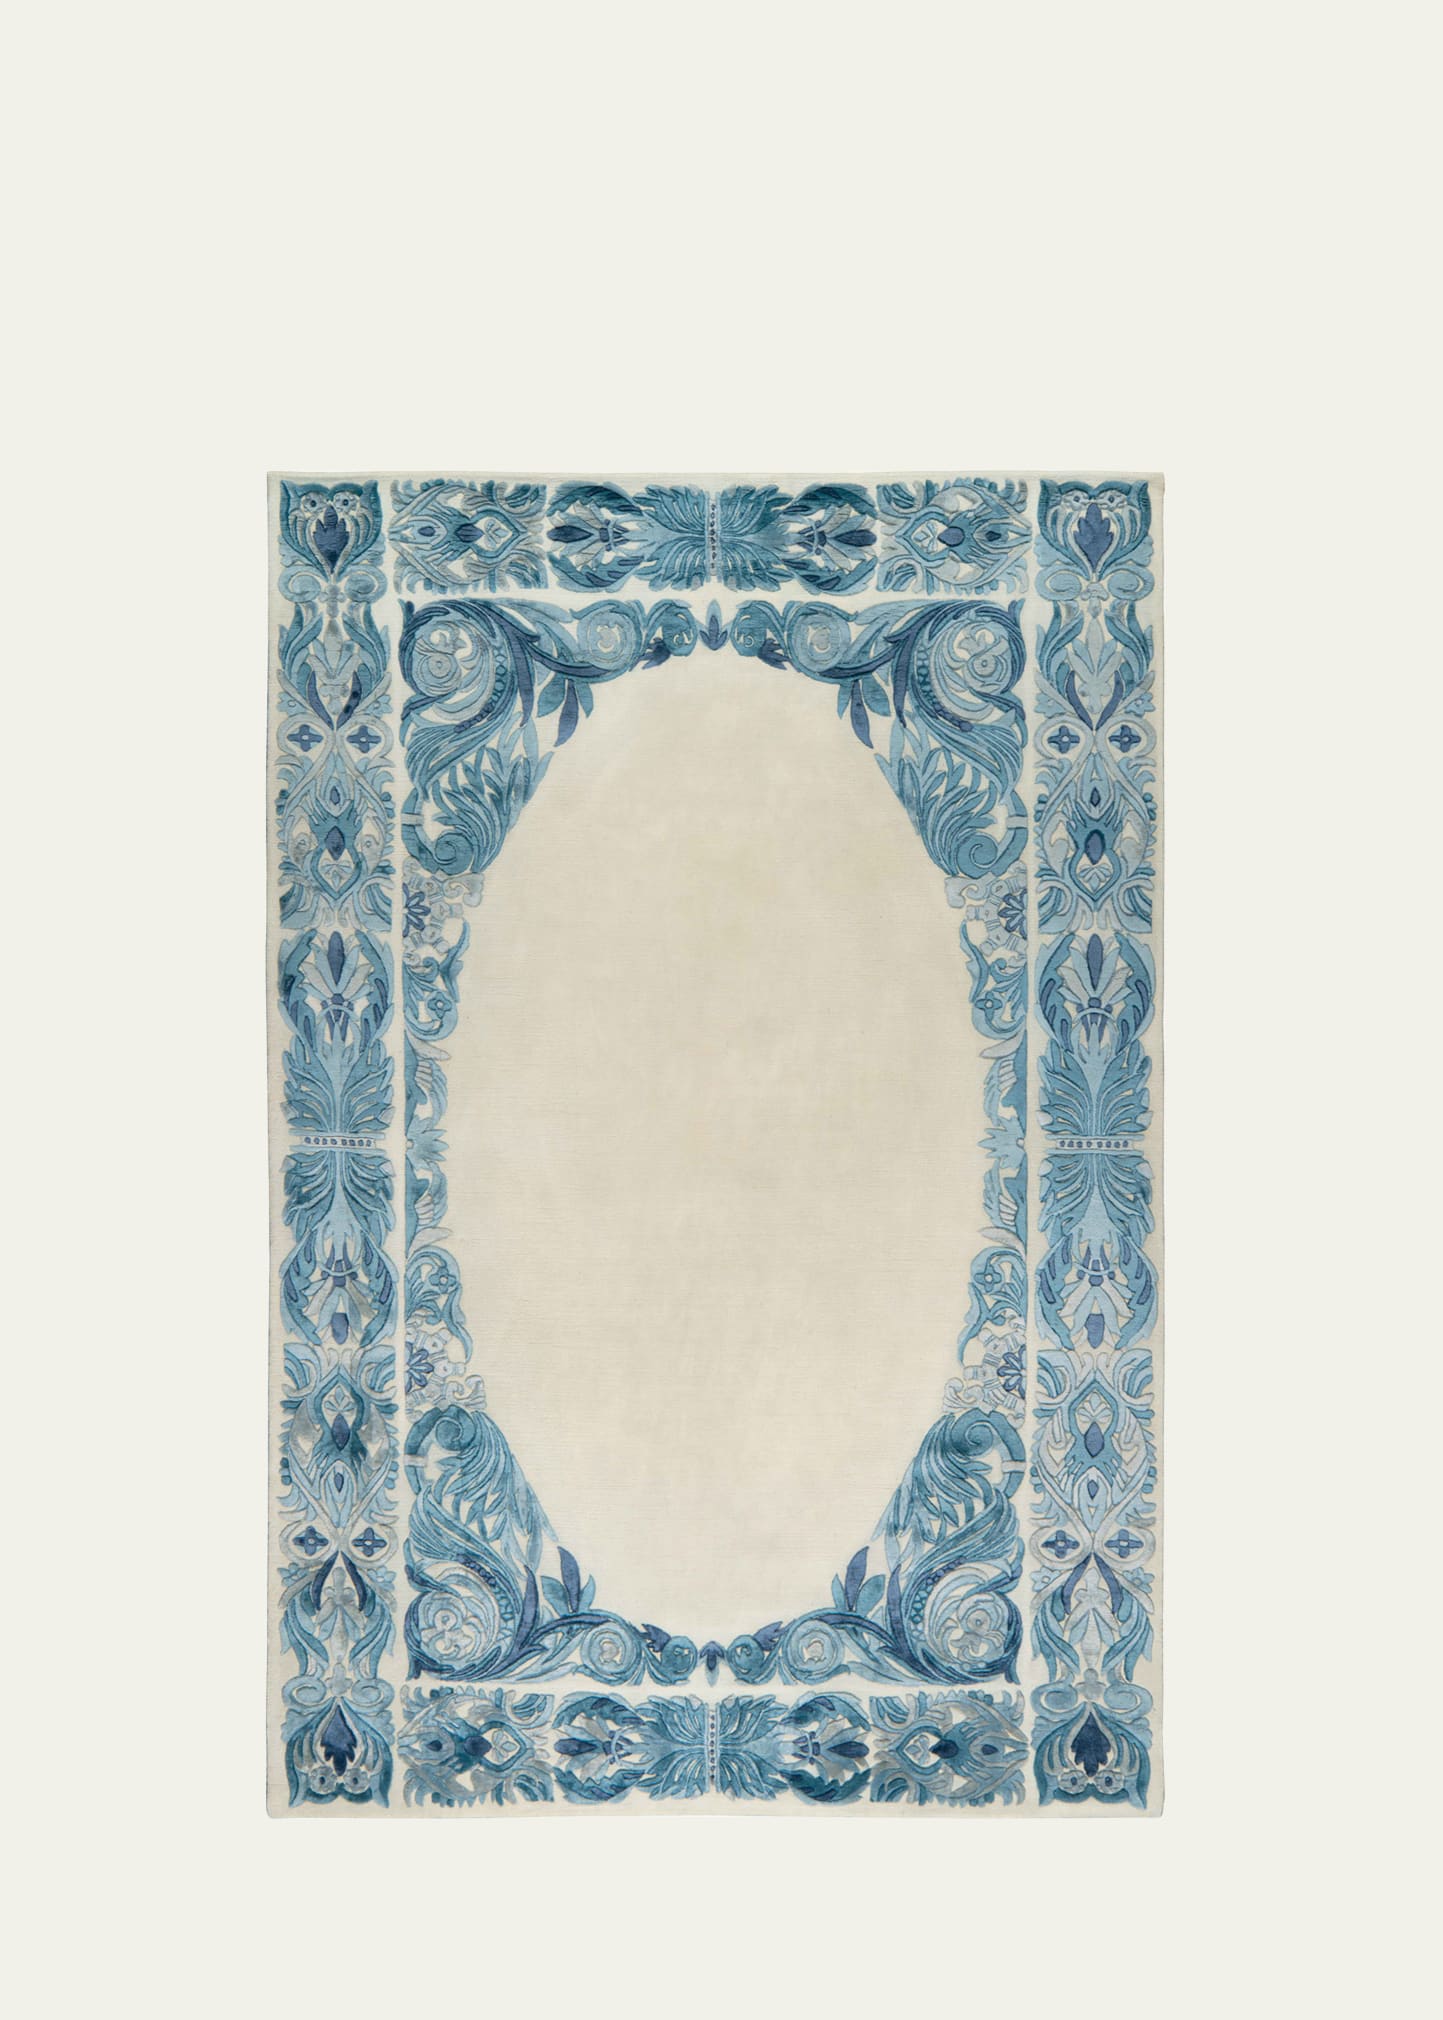 The Rug Company X Guo Pei Splendour Hand-knotted Rug, 9' X 12' In Blue